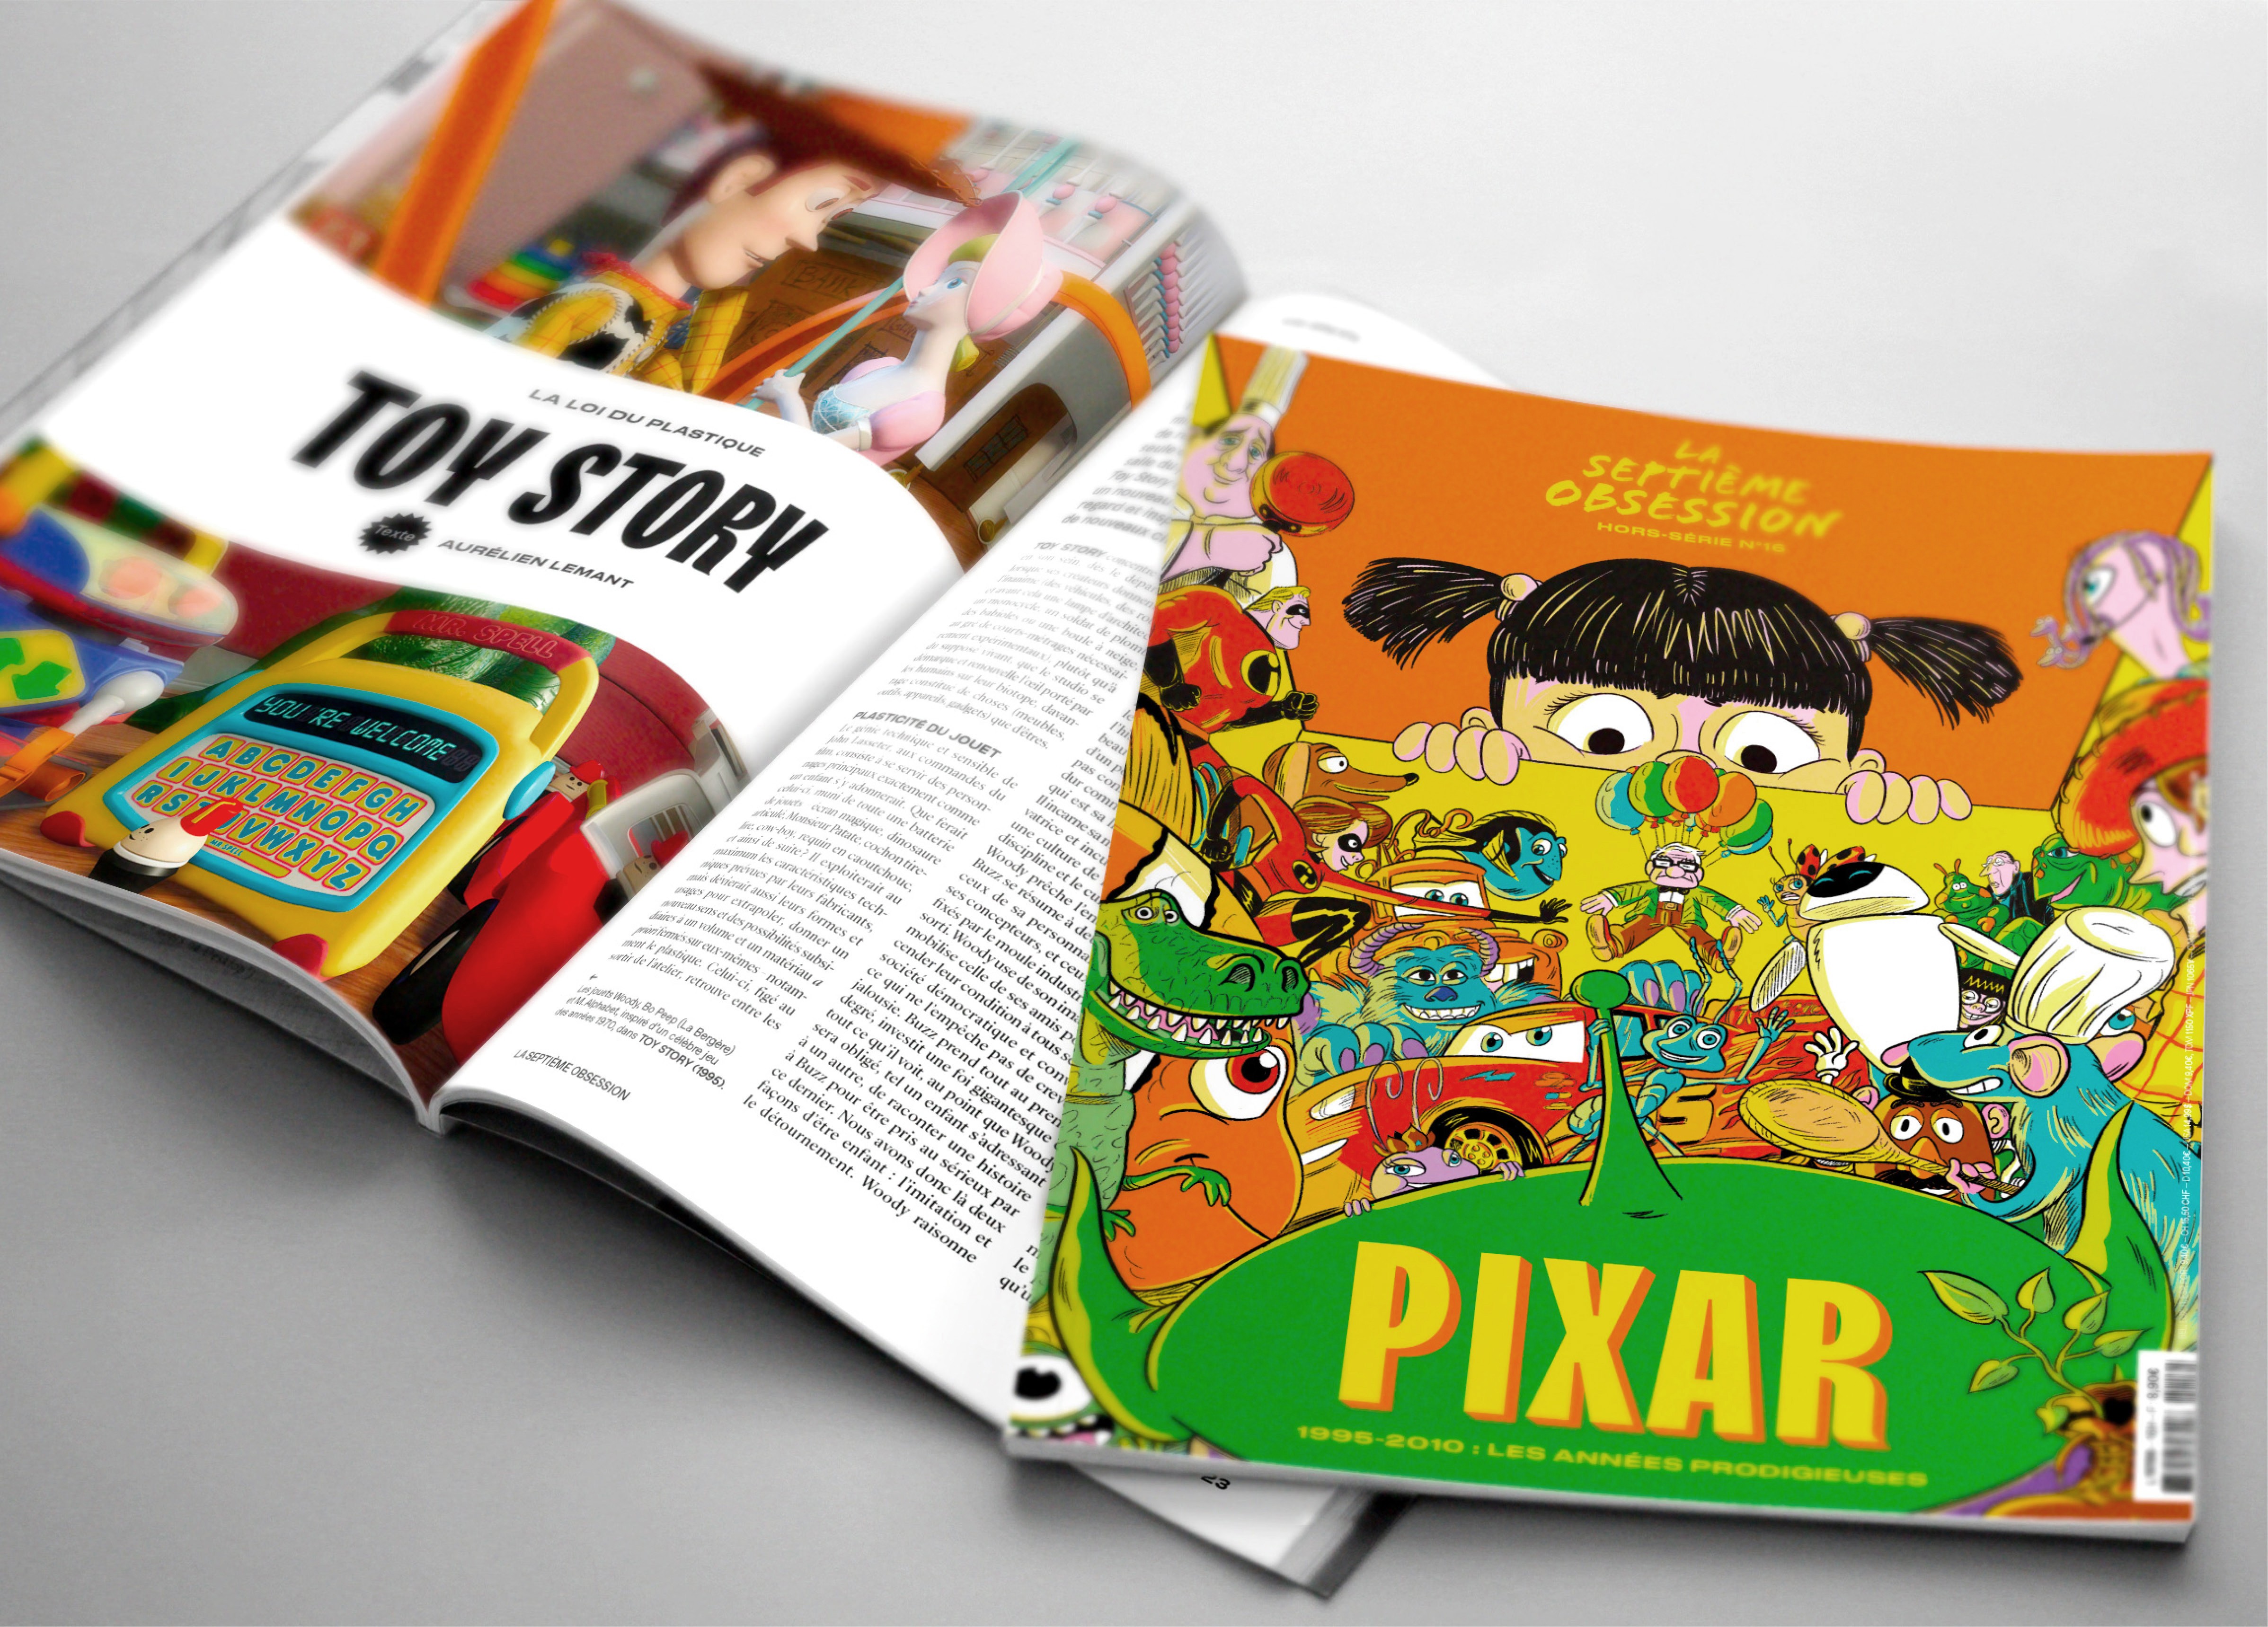 La Septieme Obsession Special issue 16 - Pixar